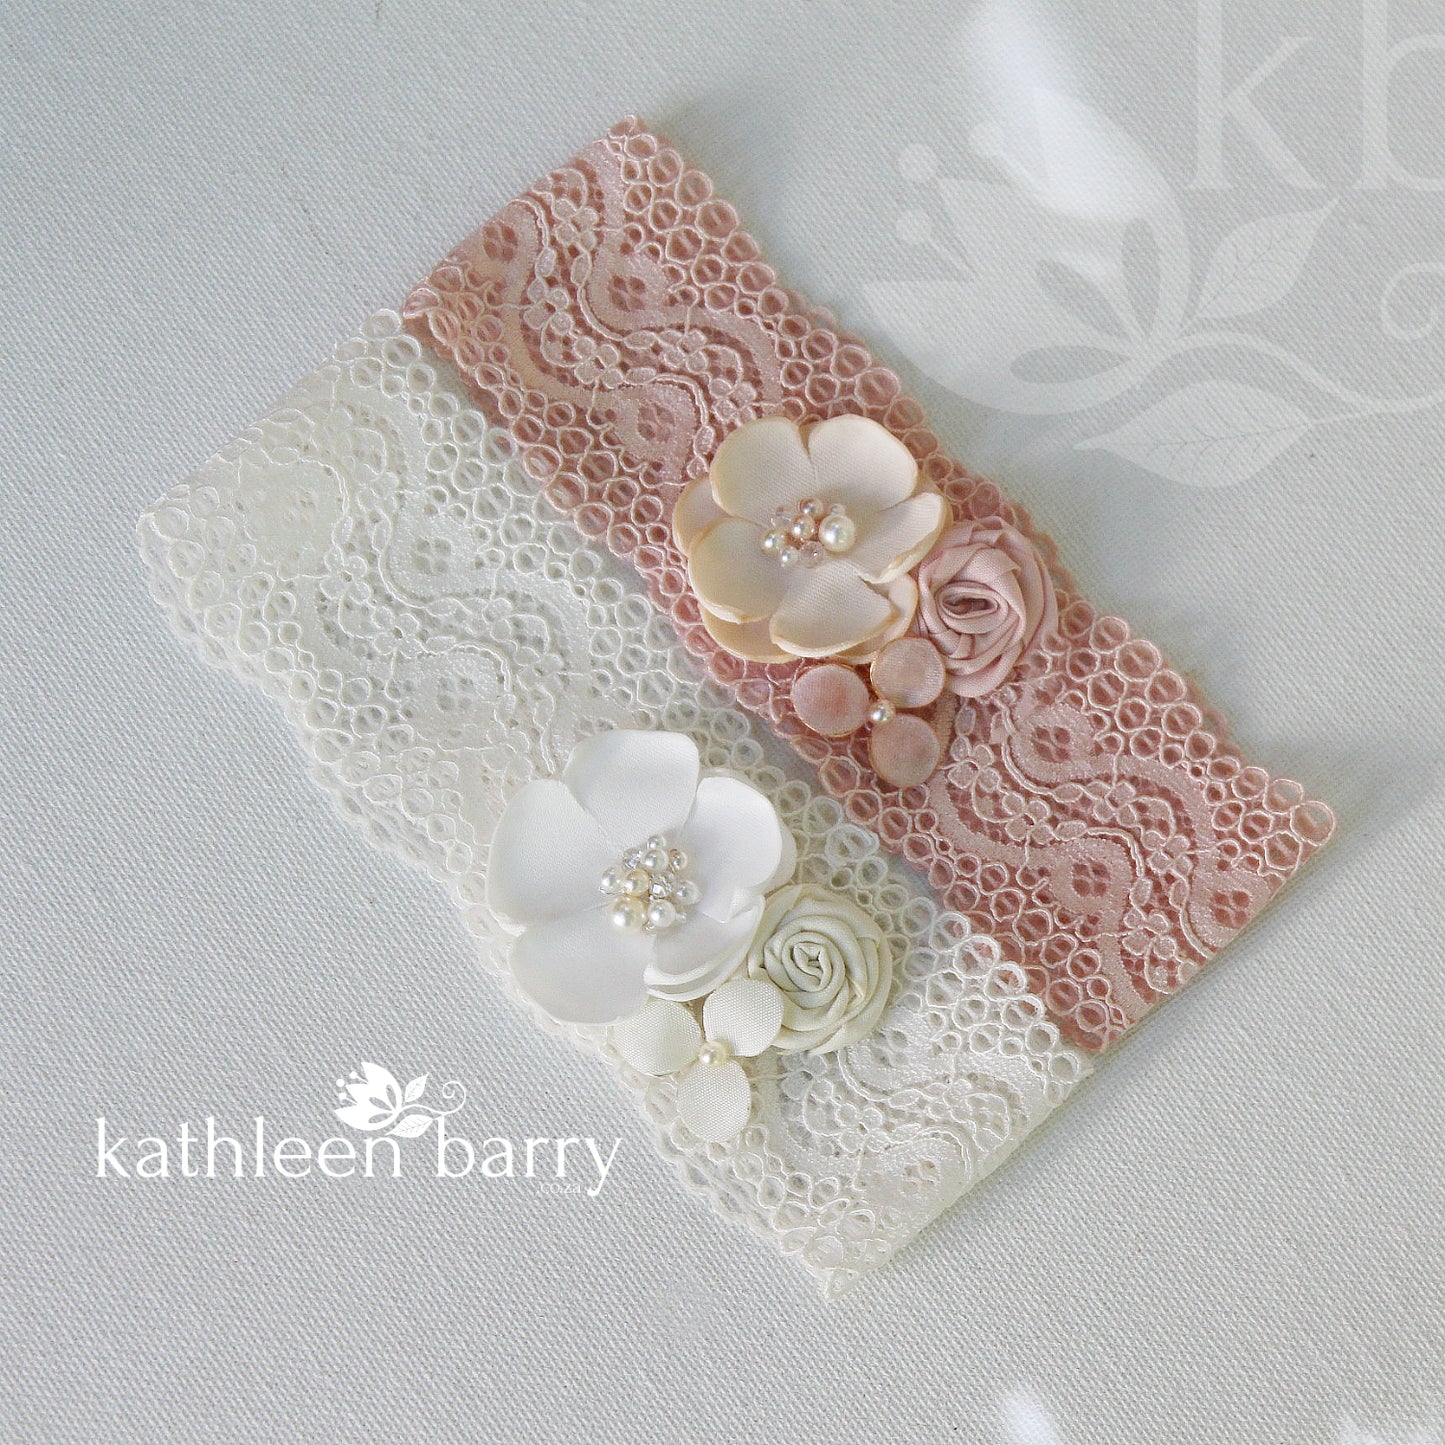 Simone Garter - Shades ivory & off white or blush & dusty pink - Custom colors to order